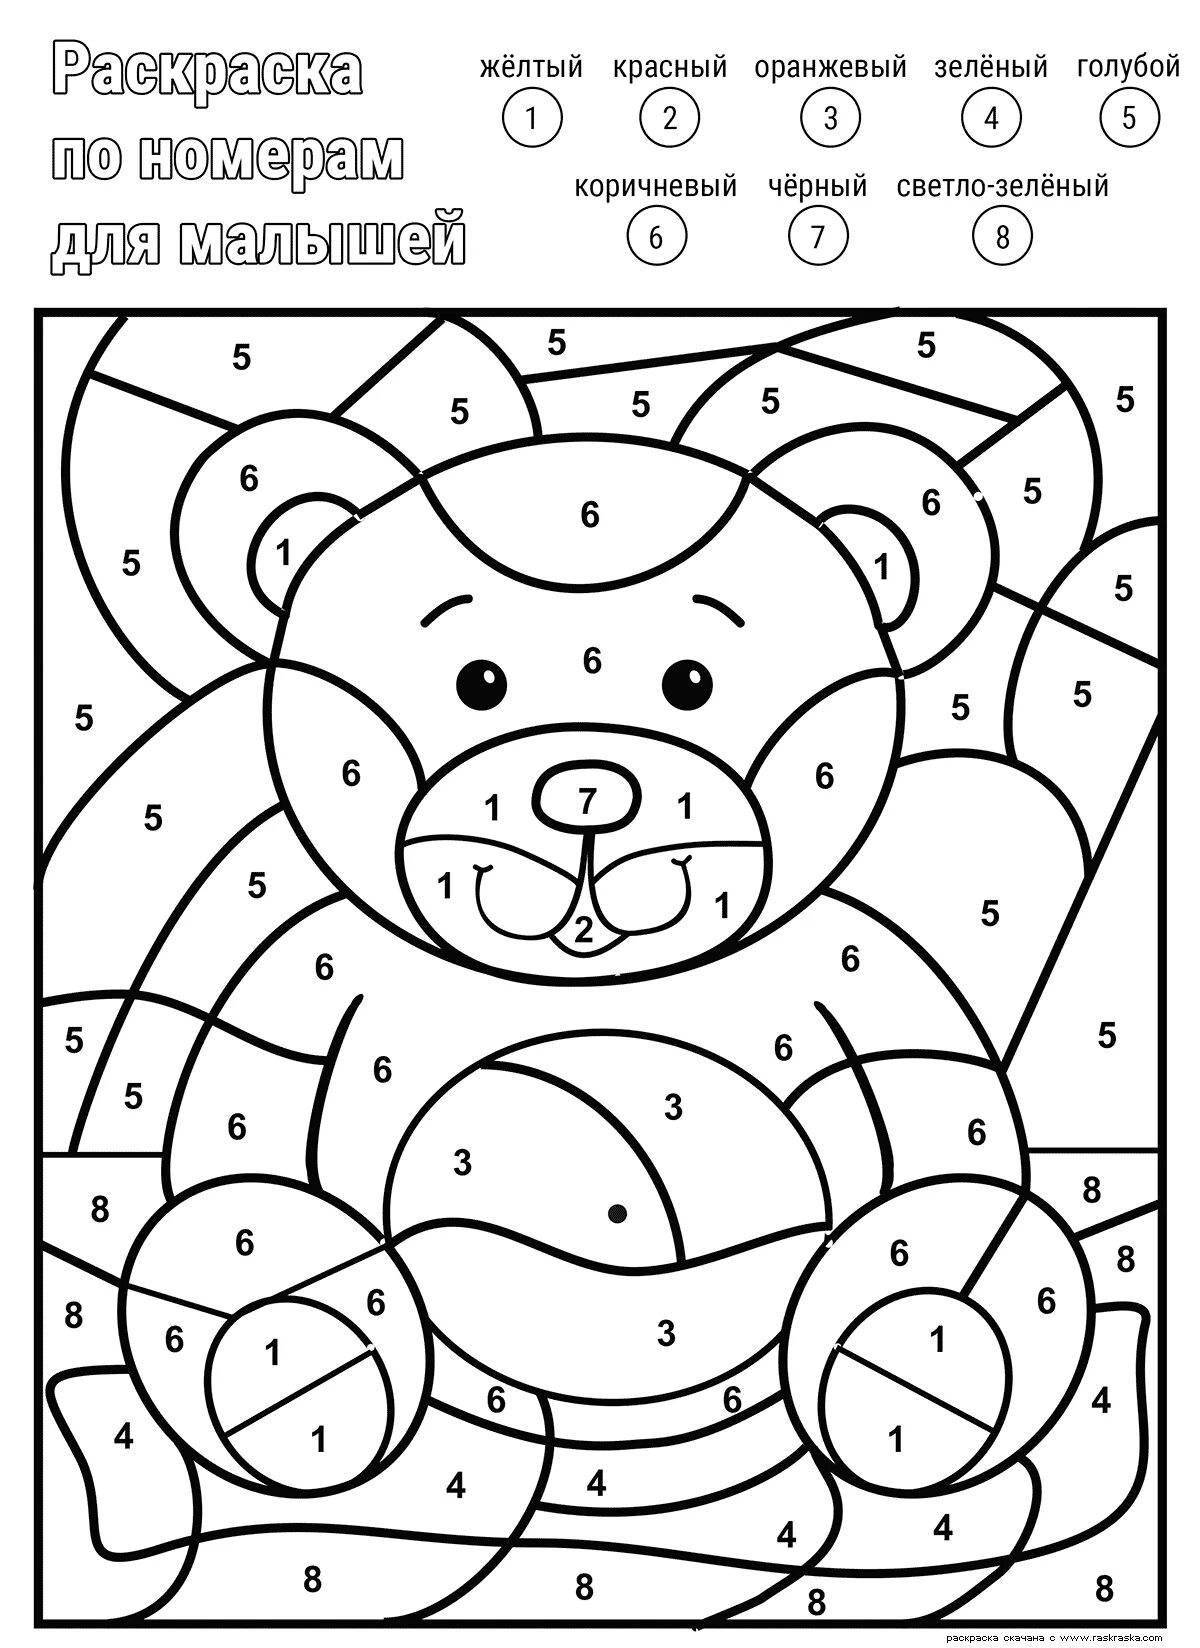 Colorful illusion create by numbers coloring page